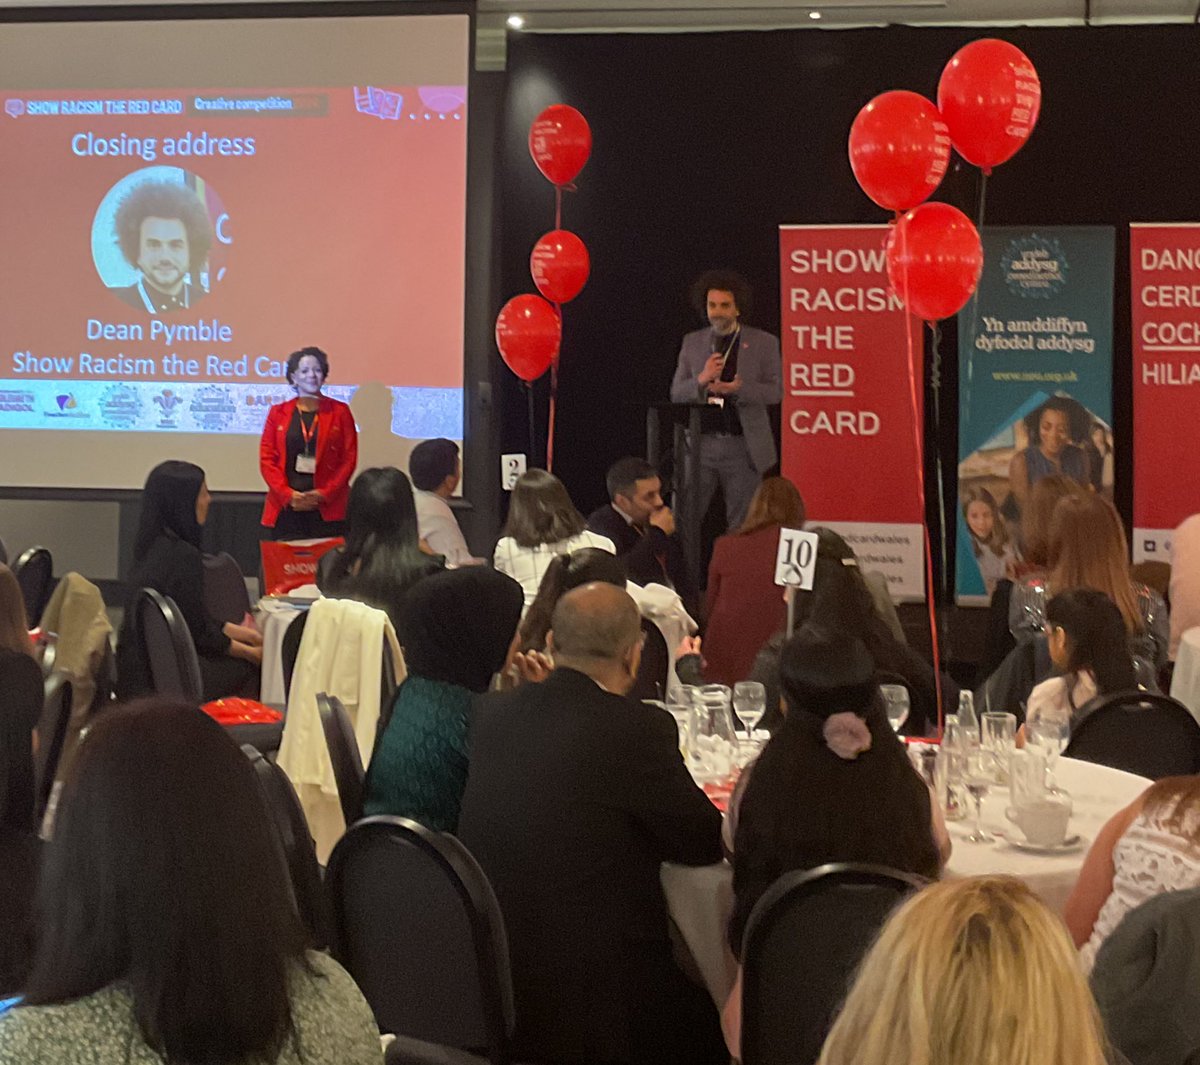 Dean Pymble, Campaign Manager, closed the awardsdiscussing the importance of our work, thanking sponsors @NEUCymru, @DARPLwales, @Cardiffmet, @WelshRugbyUnion & @Teacheractive asking for everyone’s continued support to eradicate racism.   #ShowRacismtheRedCard #SRtRCComp24